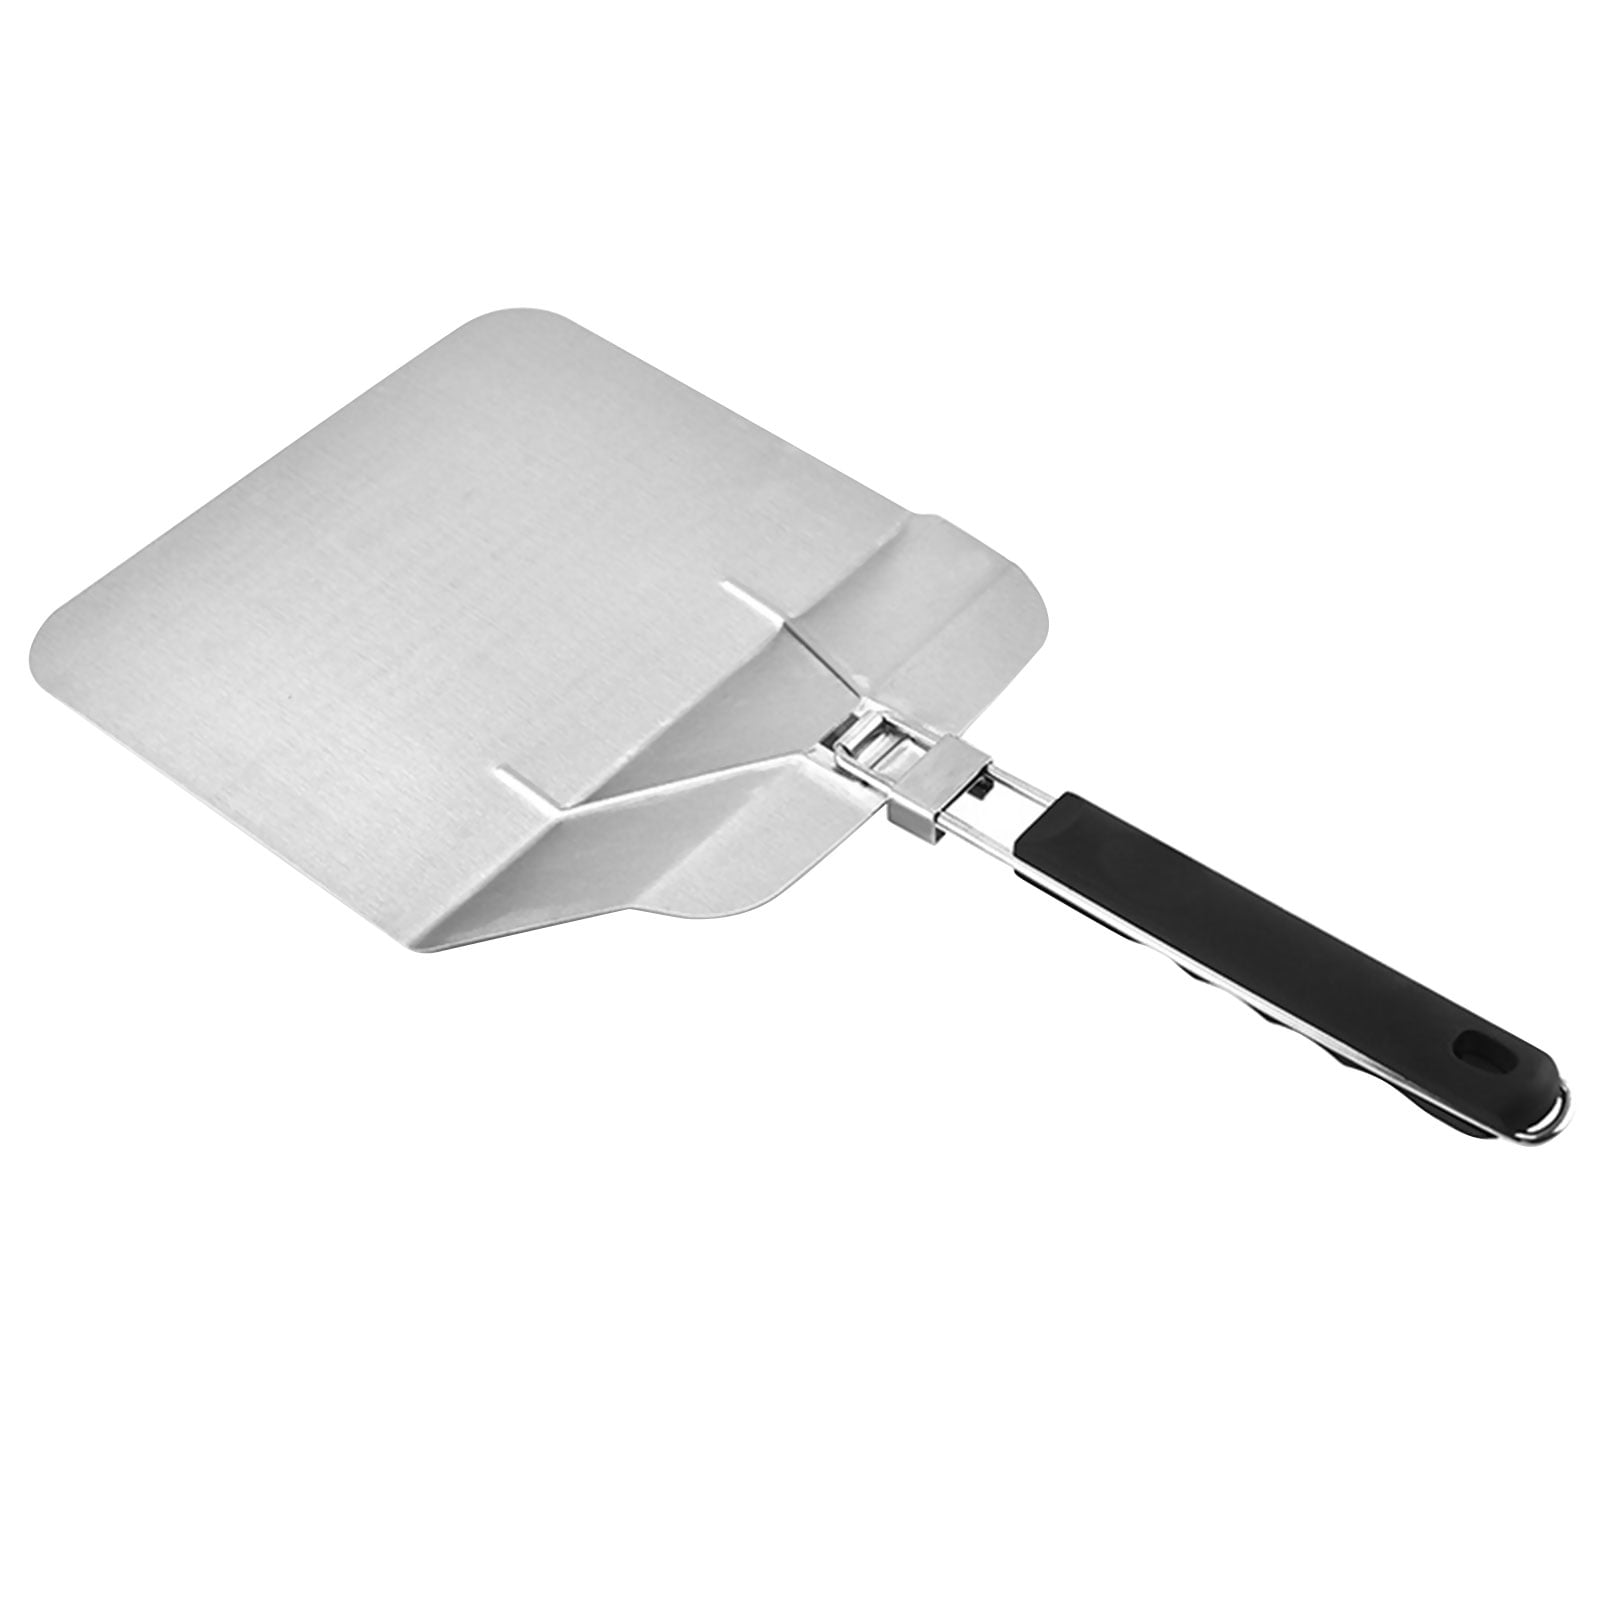 Stainless Steel Pizza Peel With Folding Handle for Baking Homemade Pizza Bread Easy To Storage Practical Kitchen Bakery Oven Accessories 